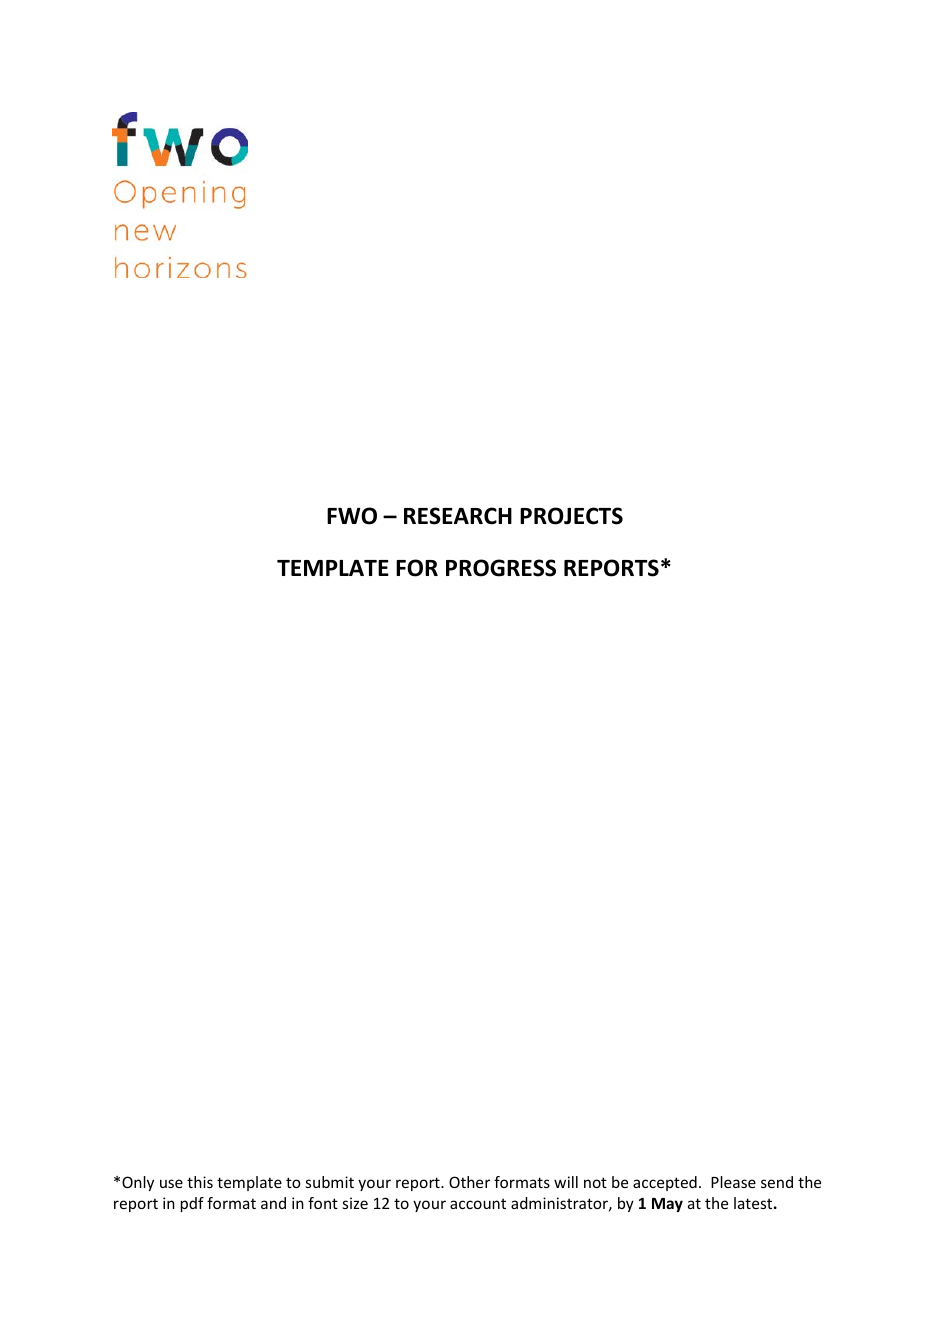 Project Progress Report Template, Page 1